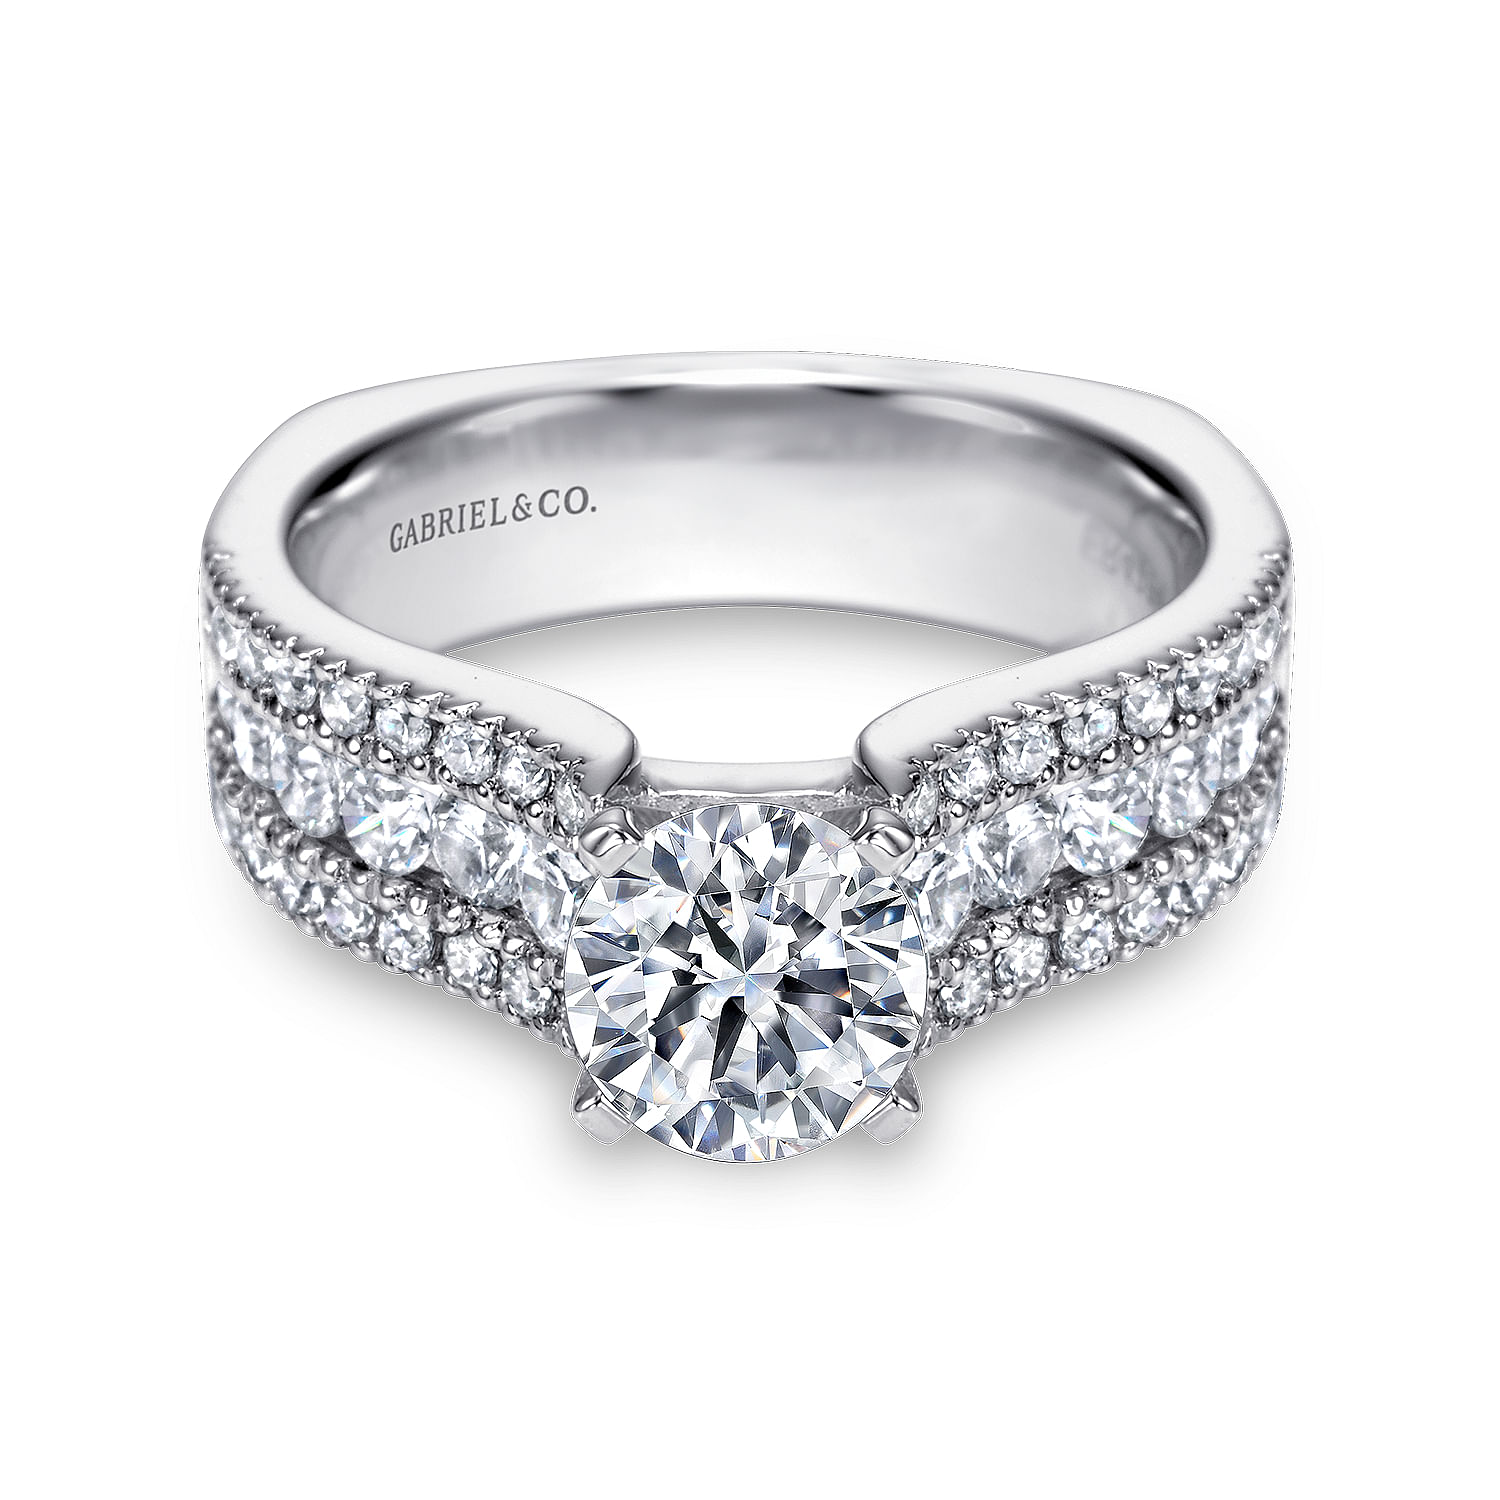 Brielle---14K-White-Gold-Round-Wide-Band-Diamond-Engagement-Ring1